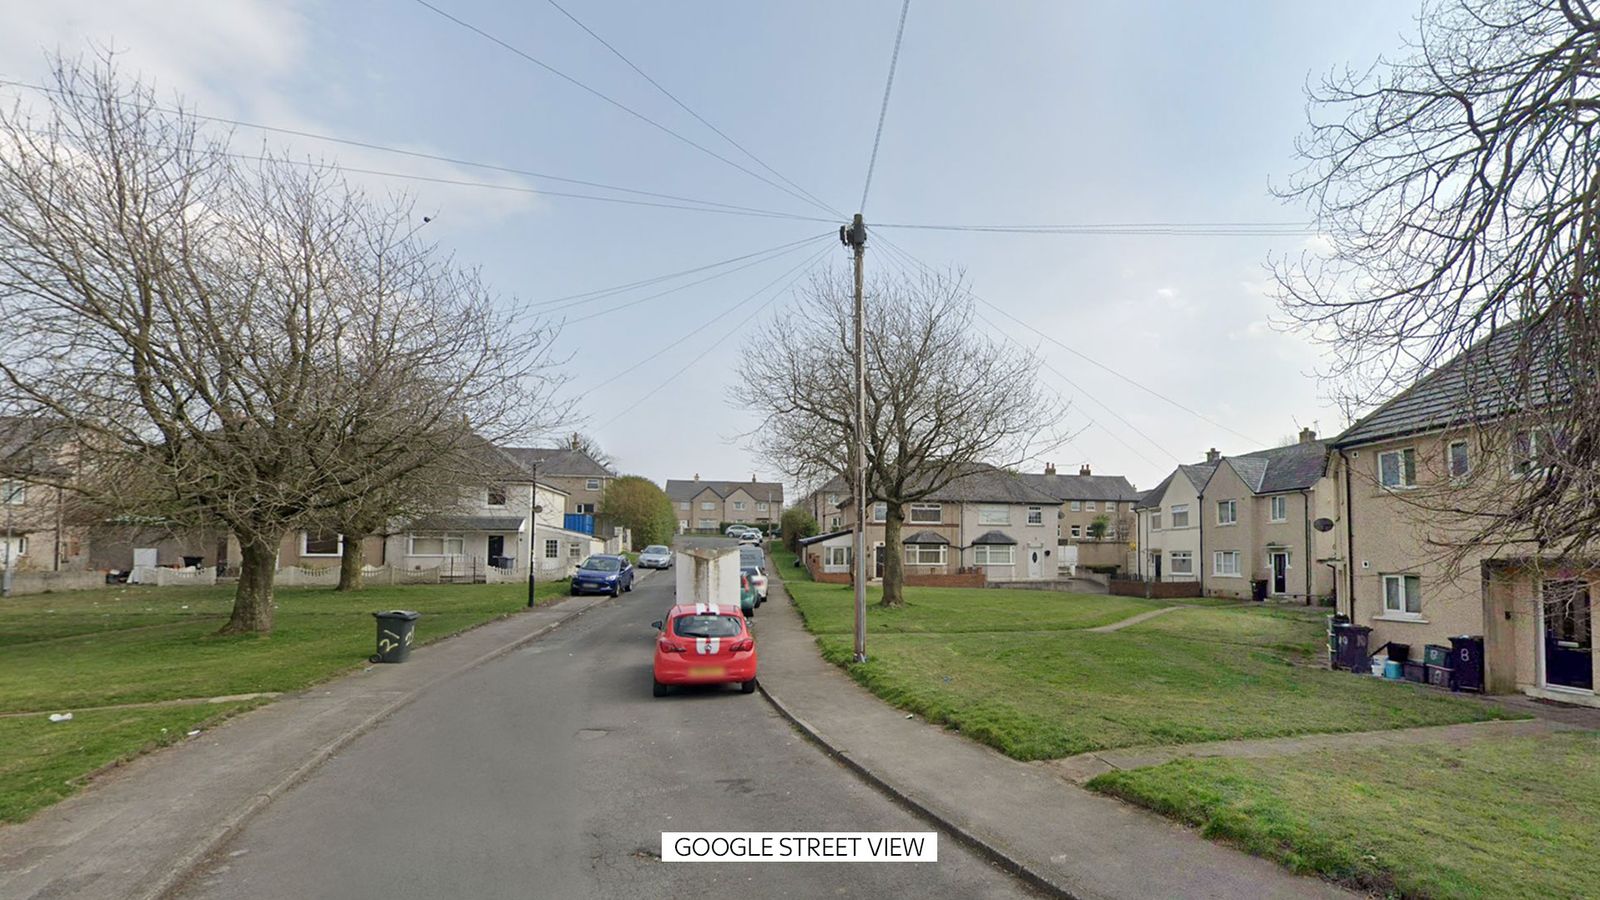 Police appeal after 'unexplained' sudden death of 11-year-old boy in Lancaster